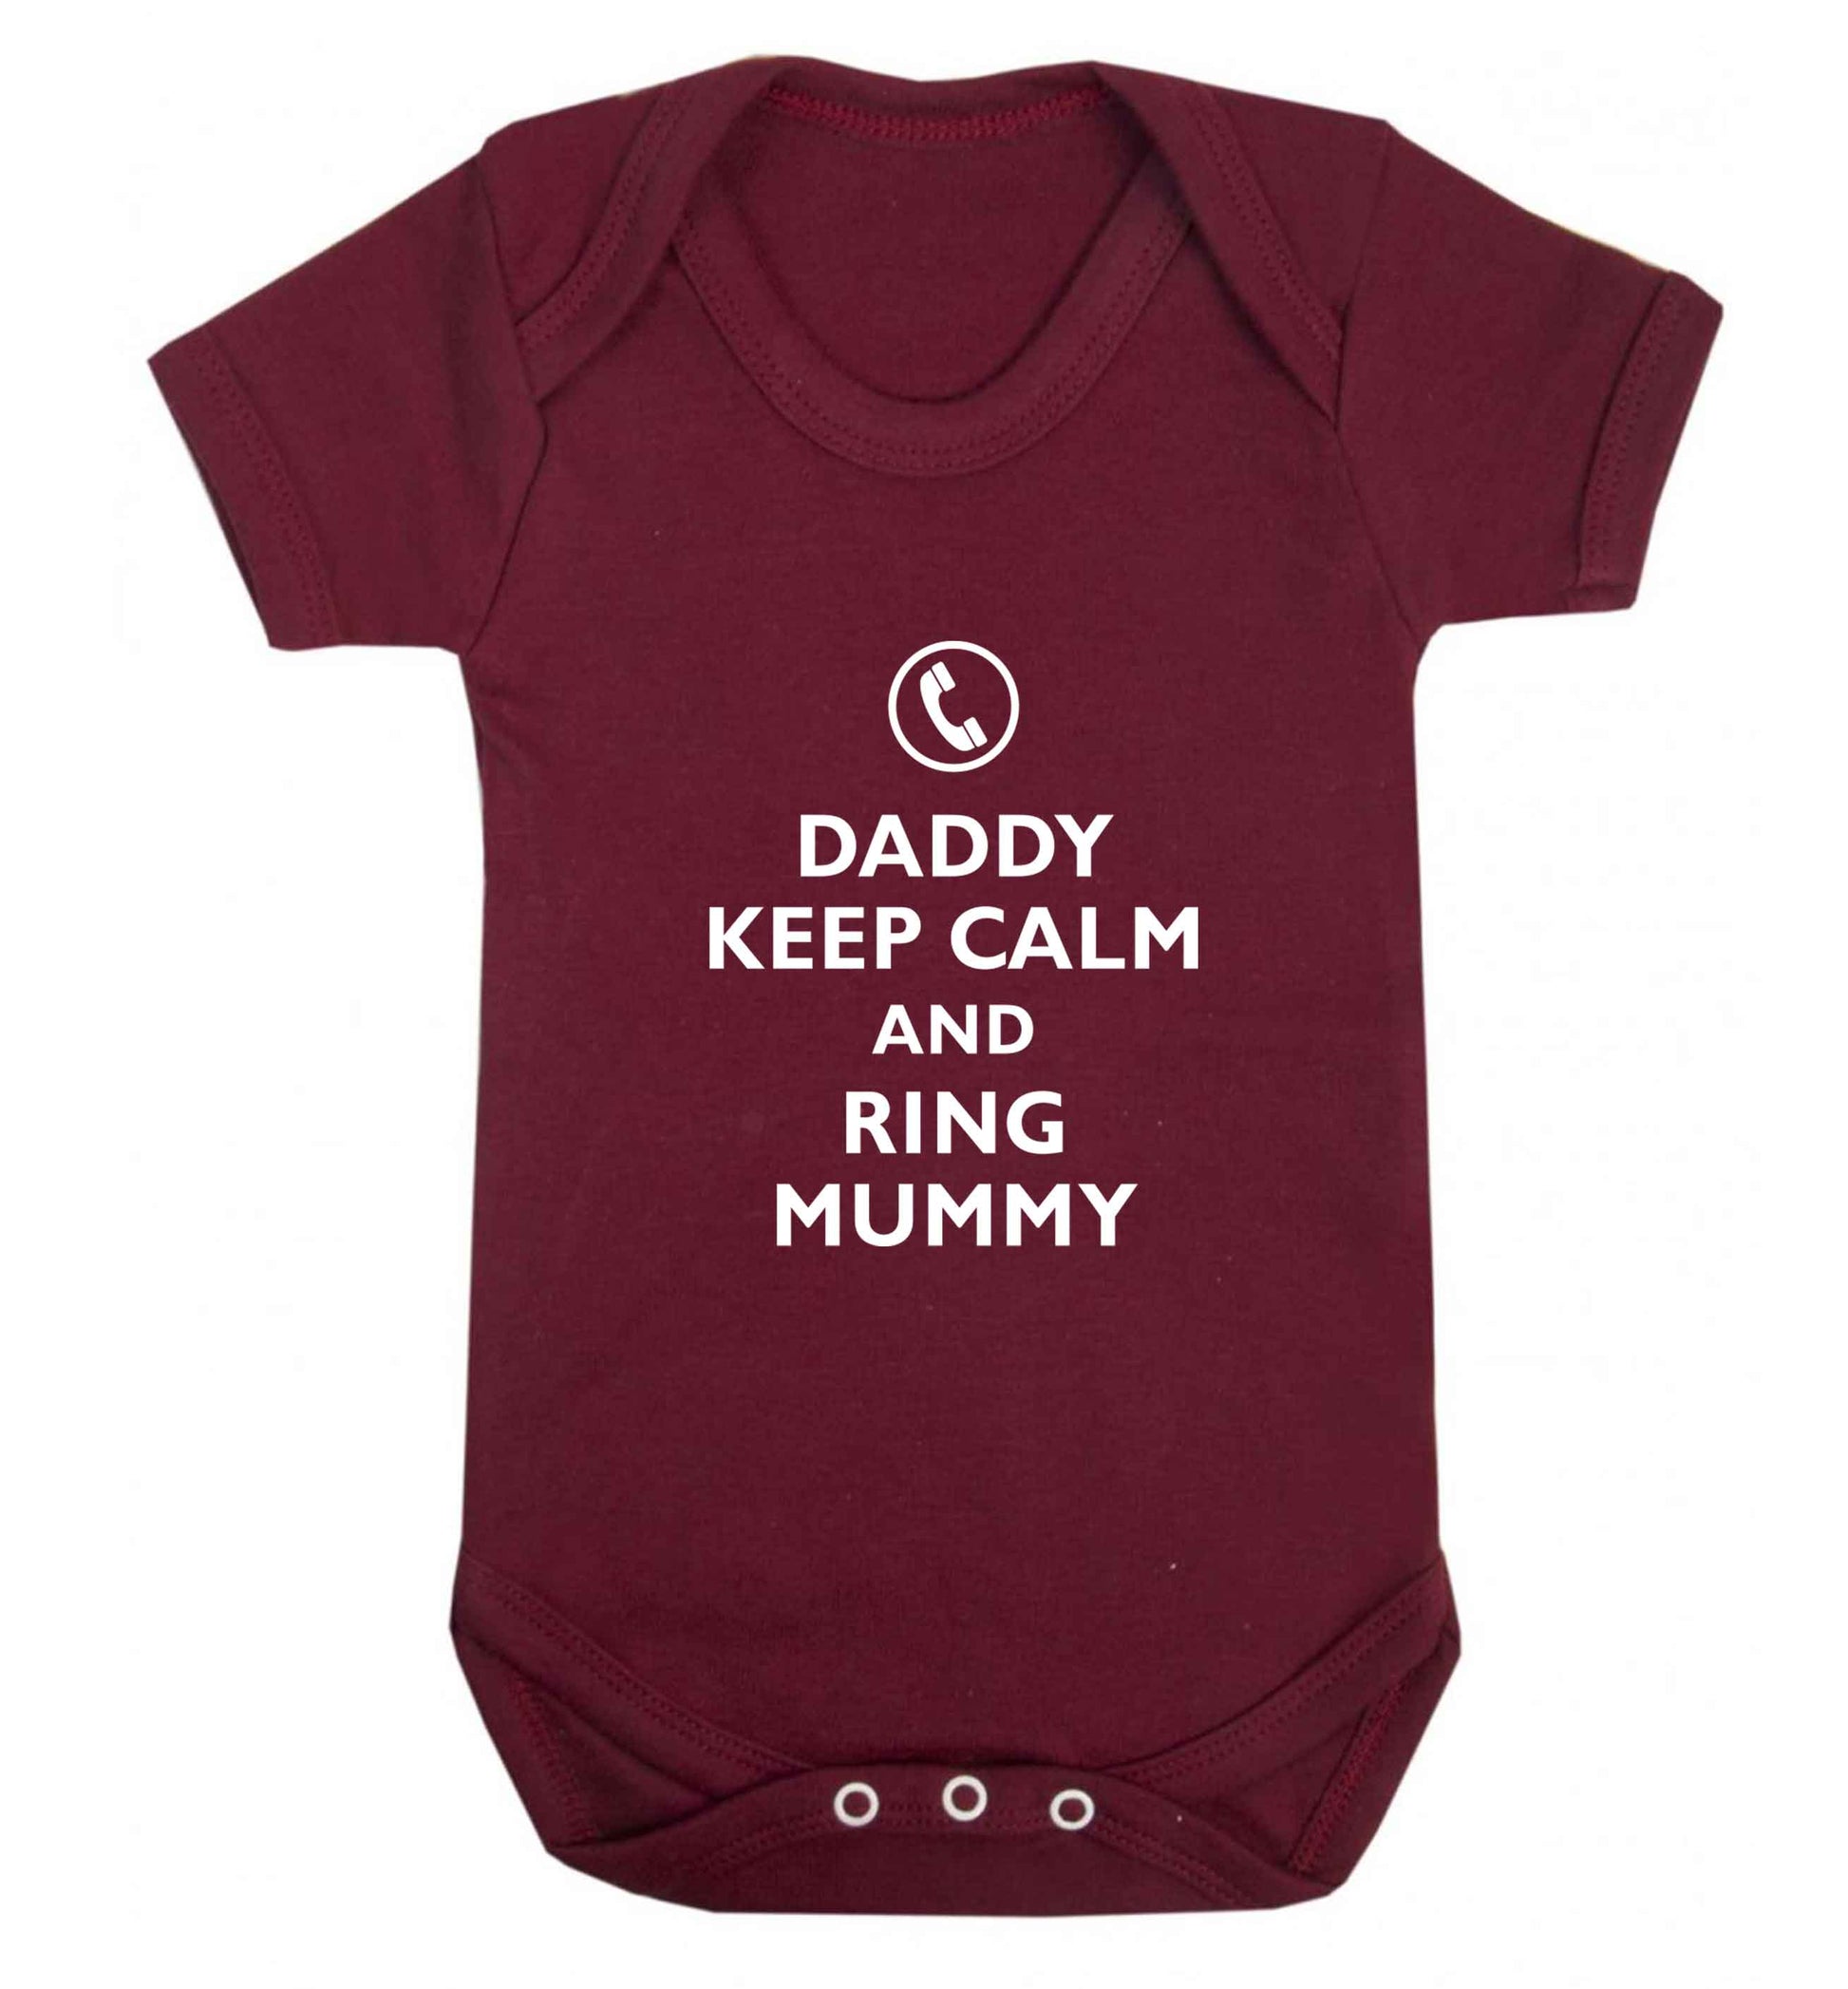 Daddy keep calm and ring mummy baby vest maroon 18-24 months